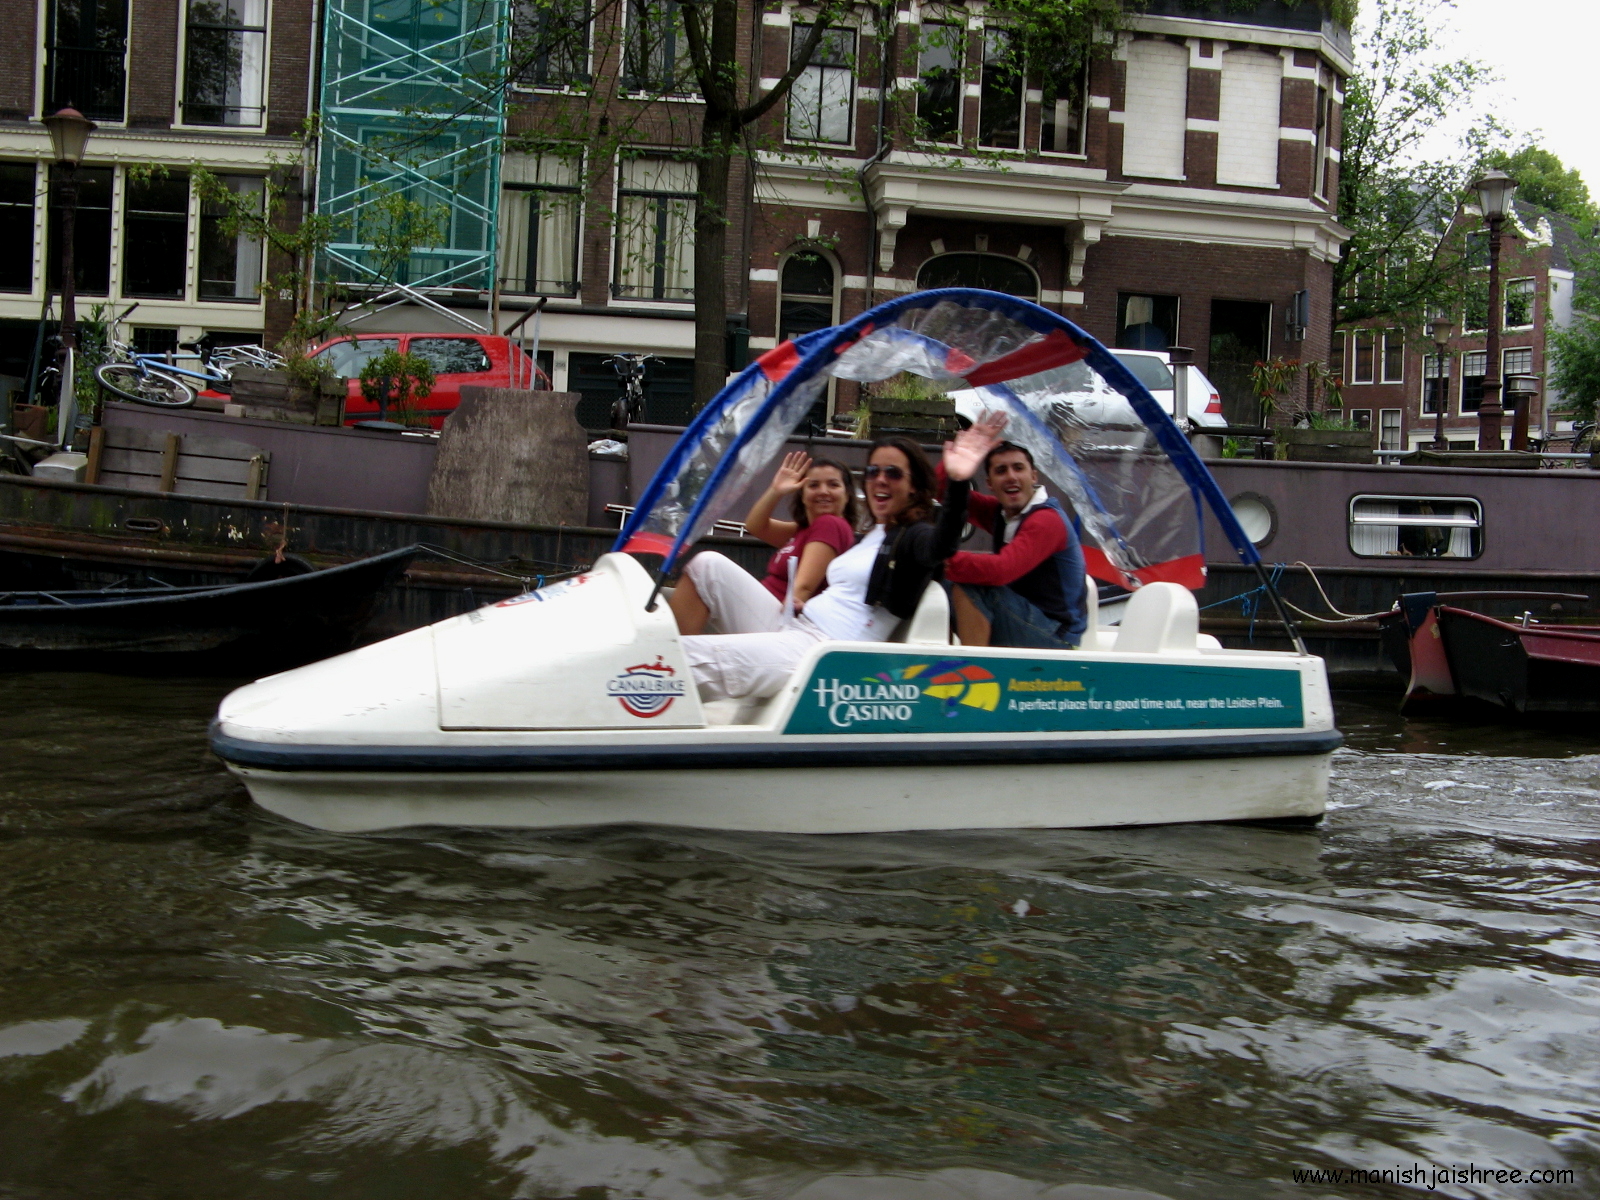 Boating in the Amstel River